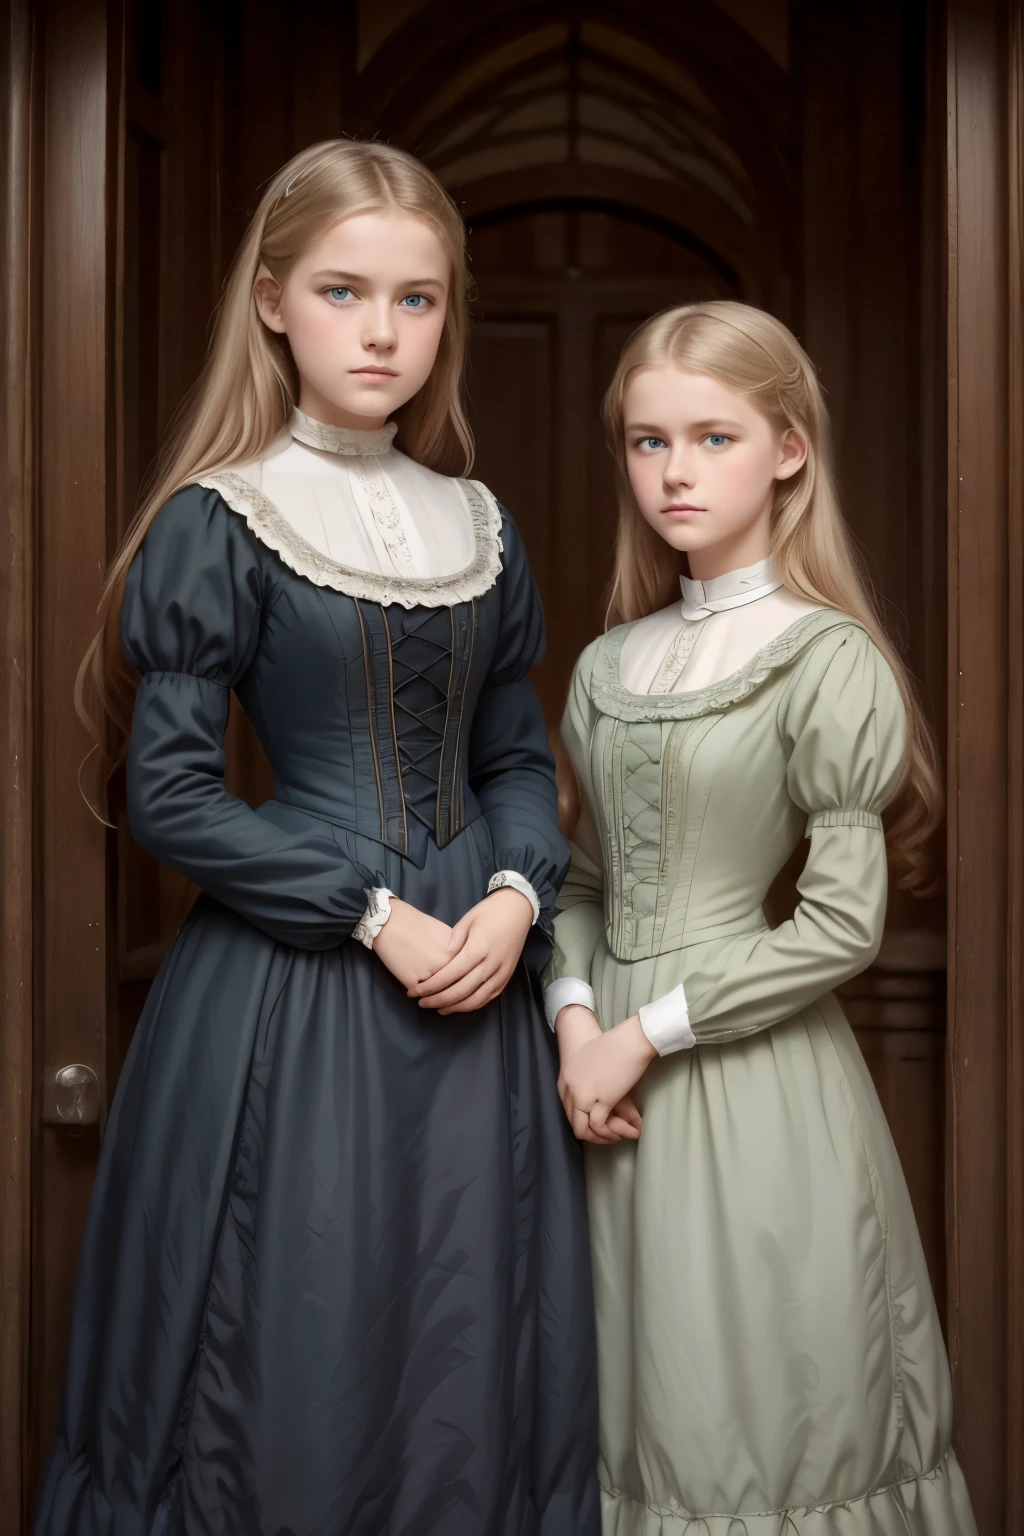 
two girls, (Virginia Otis, 15 years old (blond hair, blue eyes)) pose with (16 years old Georgie Gerald (blond hair, green eyes)). Victorian style. thin, cute face, walks at night in Canterville Castle (inspired by the novel The Canterville Ghost). aged 1887, Victorian dark fantasy